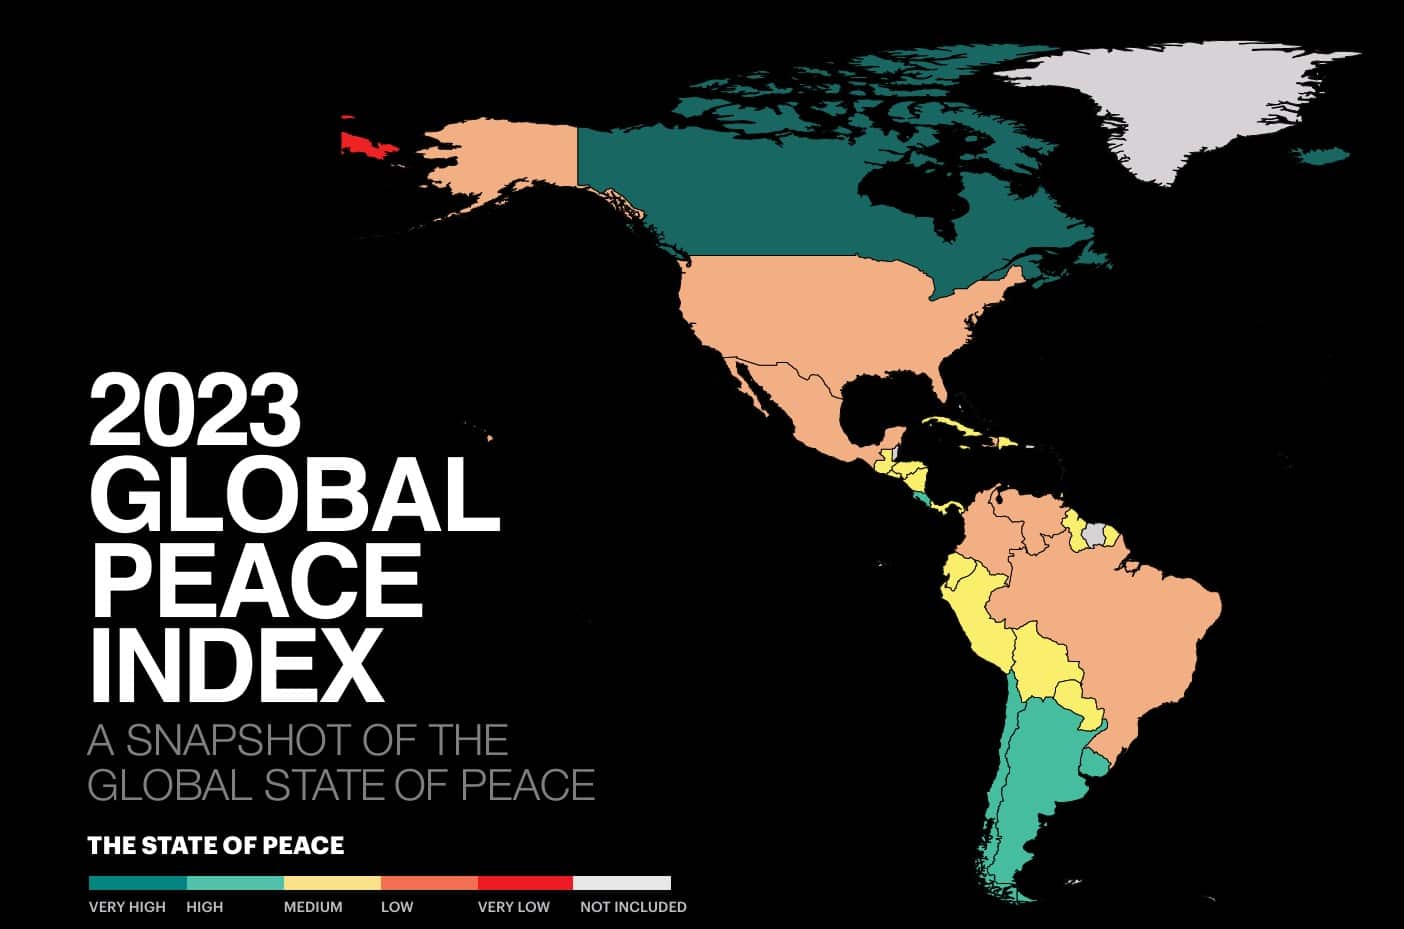 Global Peace Index rapport | 2023 | Bron Visionofhumanity.org